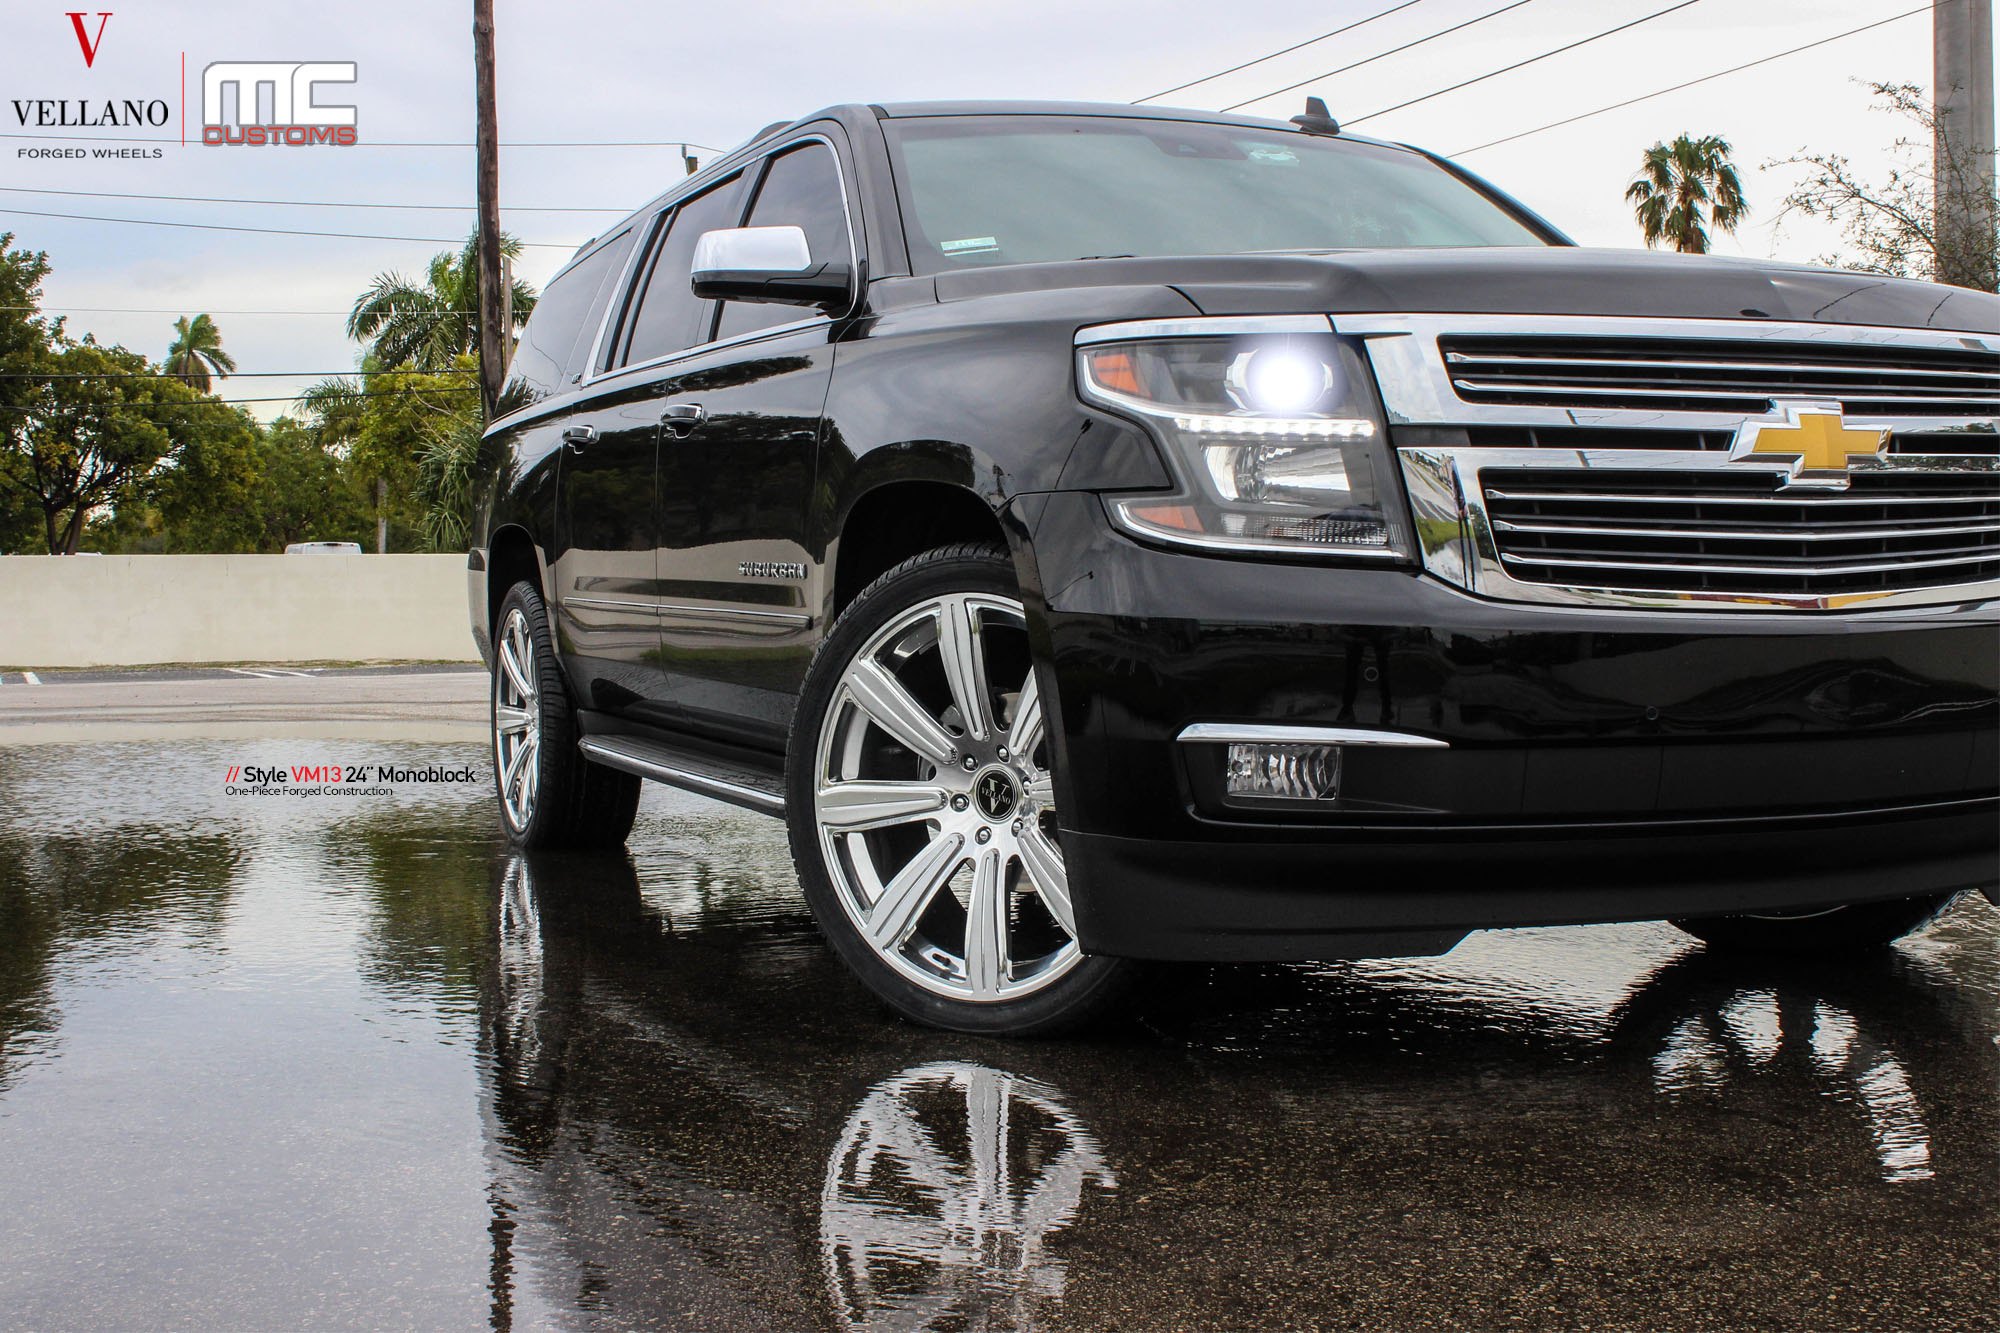 Black Chevy Tahoe with Aftermarket LED Headlights - Photo by Vellano